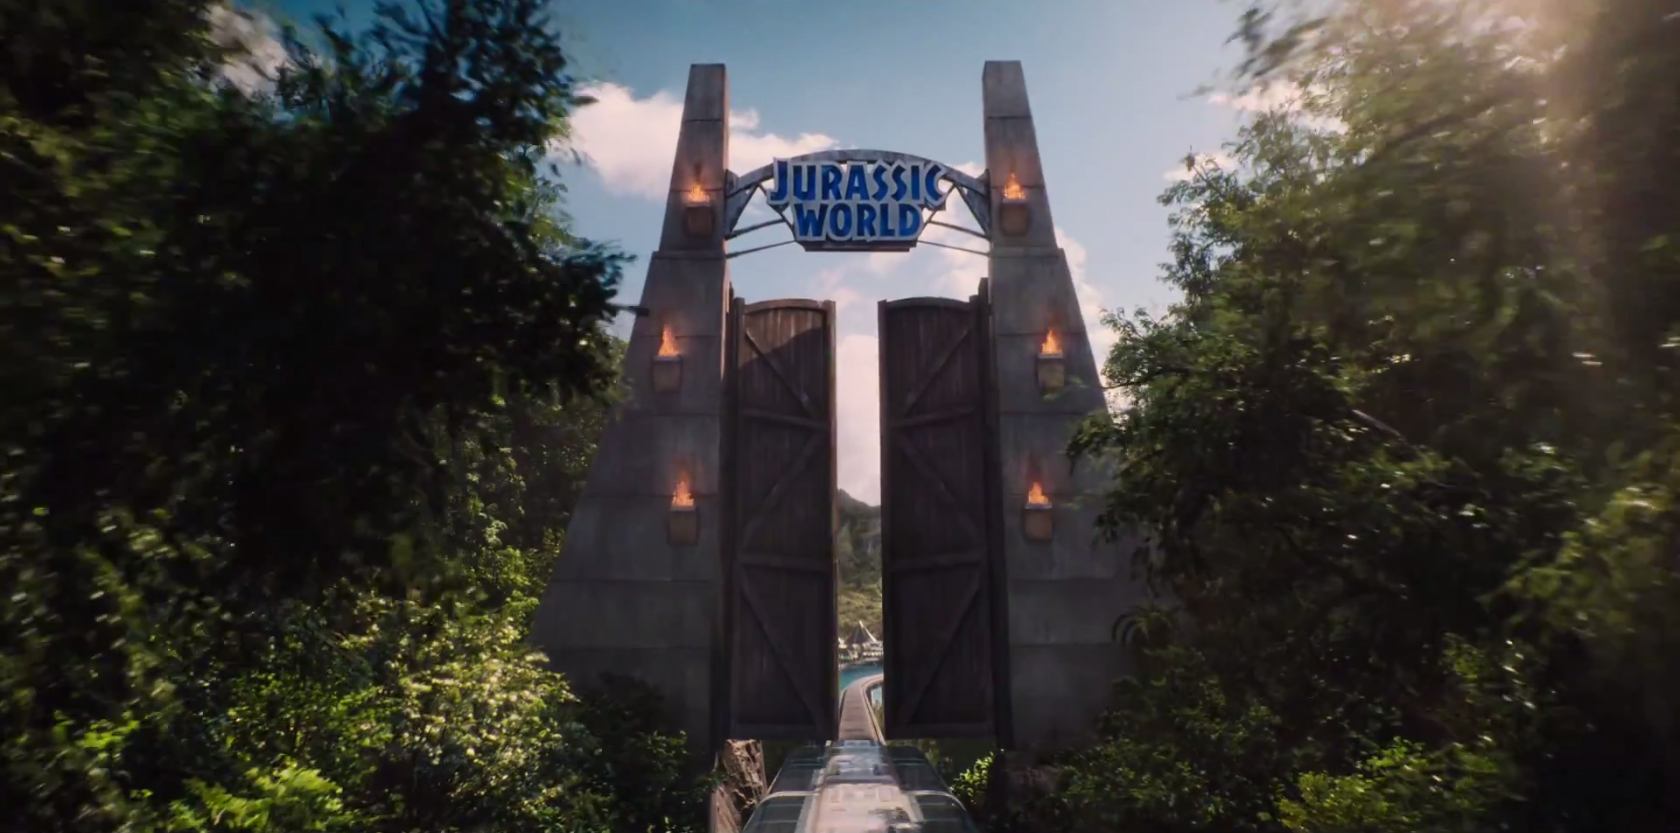 The Price of Admission: The Socioeconomic & Racial Implications of Jurassic World